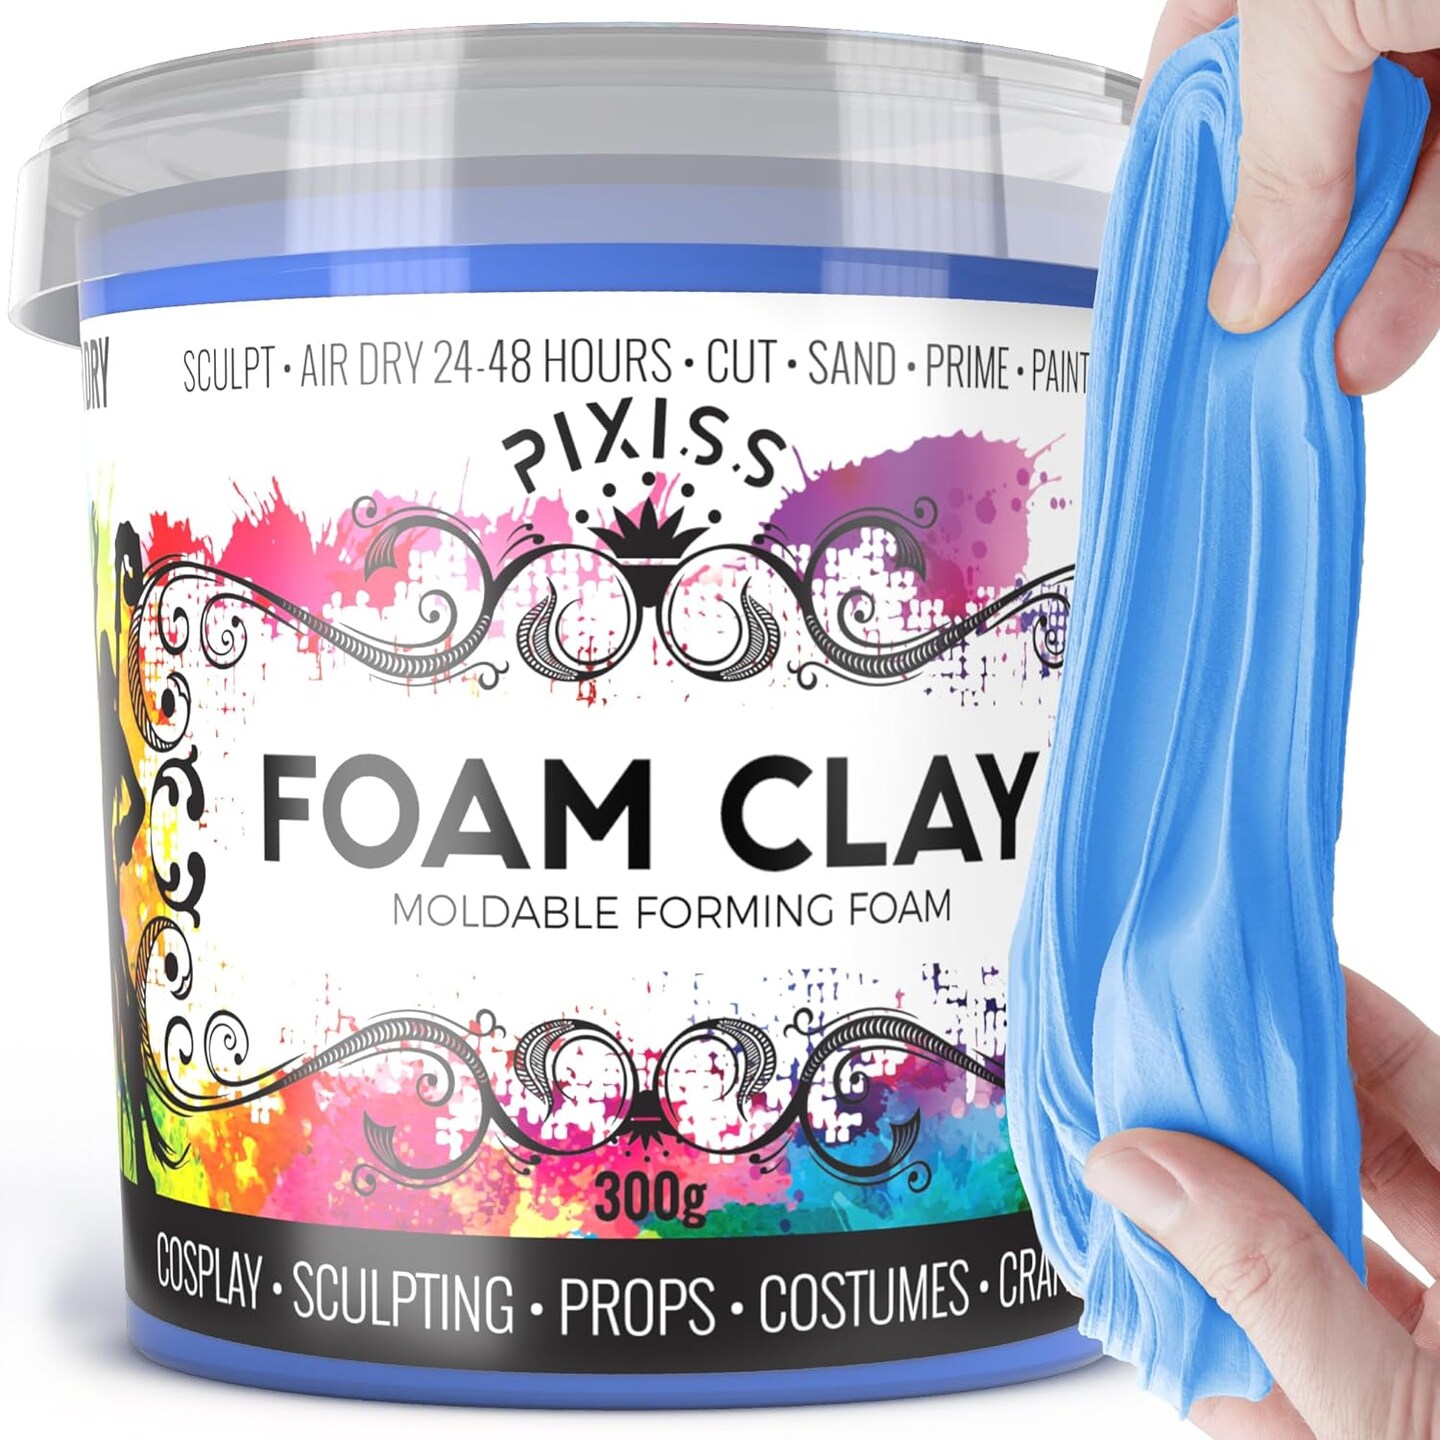 Moldable Cosplay Foam Clay (Blue) - Premium Modeling Foam Clay Air Dry, 300  Gram Cosplay Foam Sculpting Clay for Crafts - Quick Air Drying Clay Foam -  Flexible Air Dry Foam Clay for Cosplay